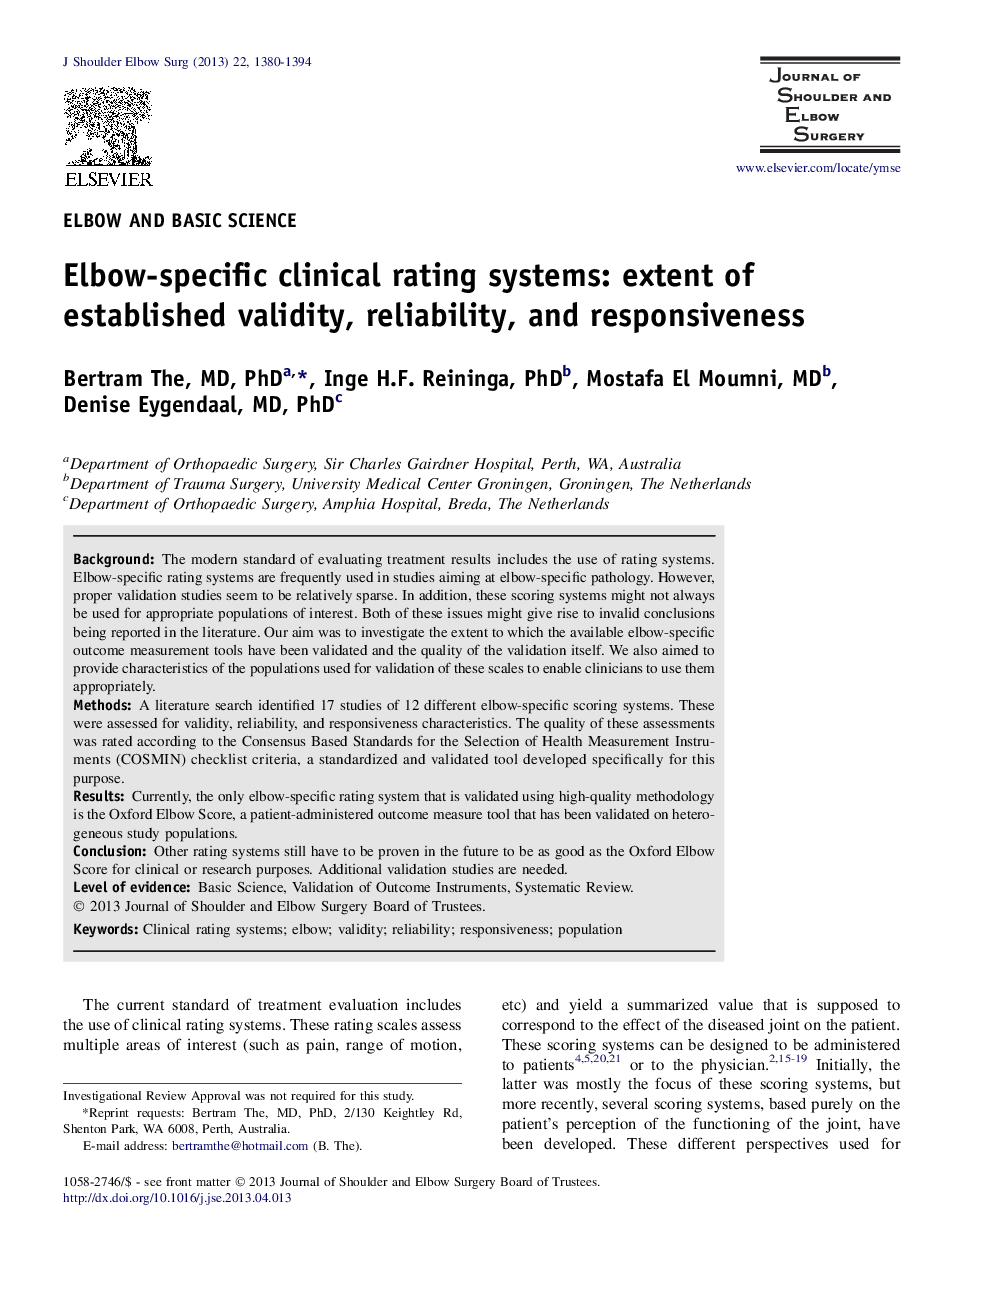 Elbow-specific clinical rating systems: extent of established validity, reliability, and responsiveness 